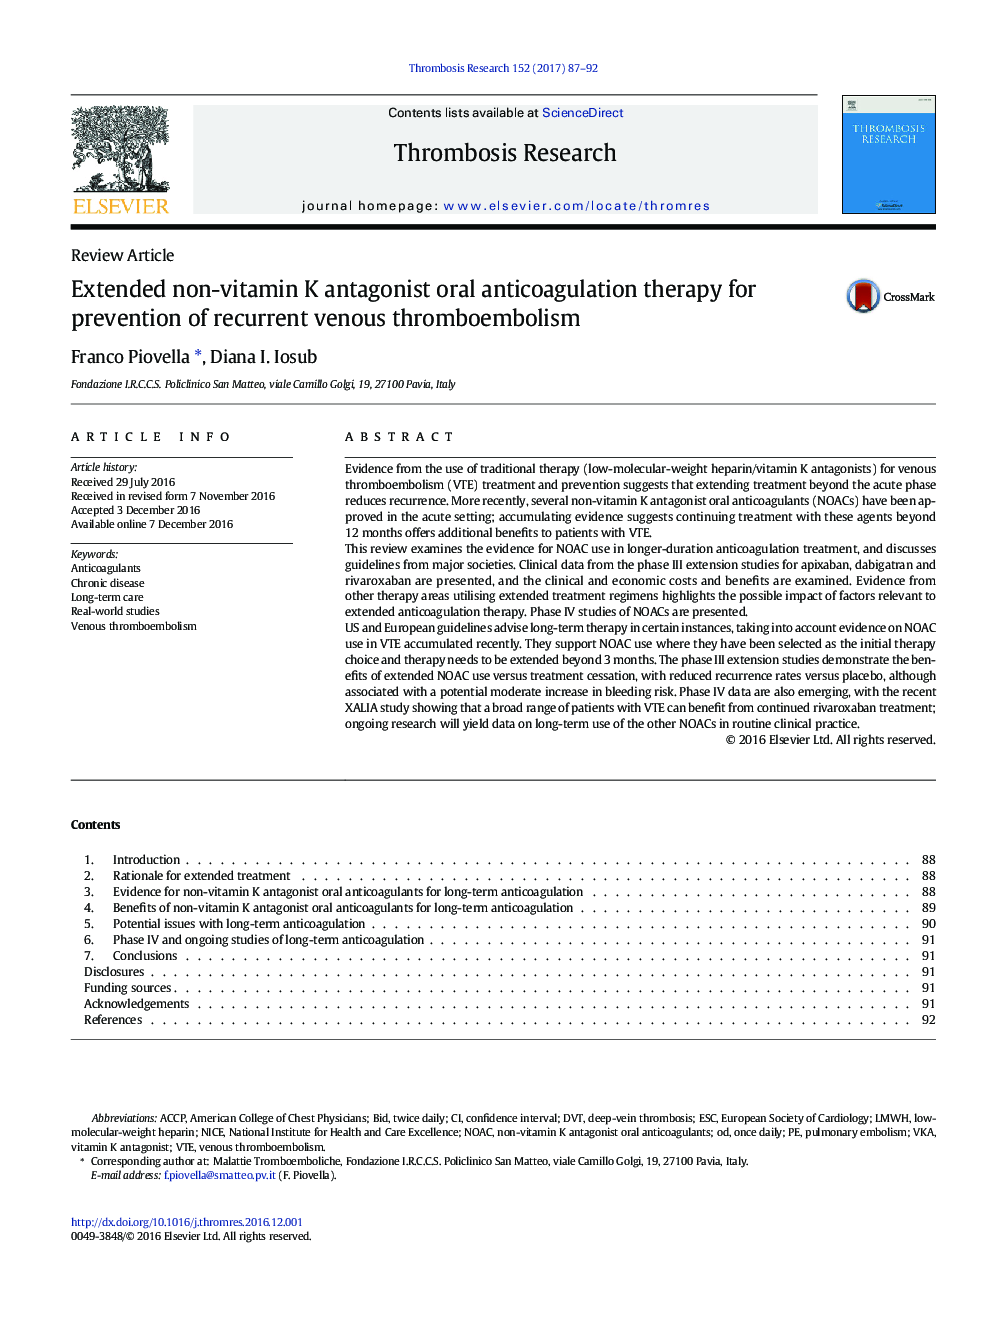 Review ArticleExtended non-vitamin K antagonist oral anticoagulation therapy for prevention of recurrent venous thromboembolism